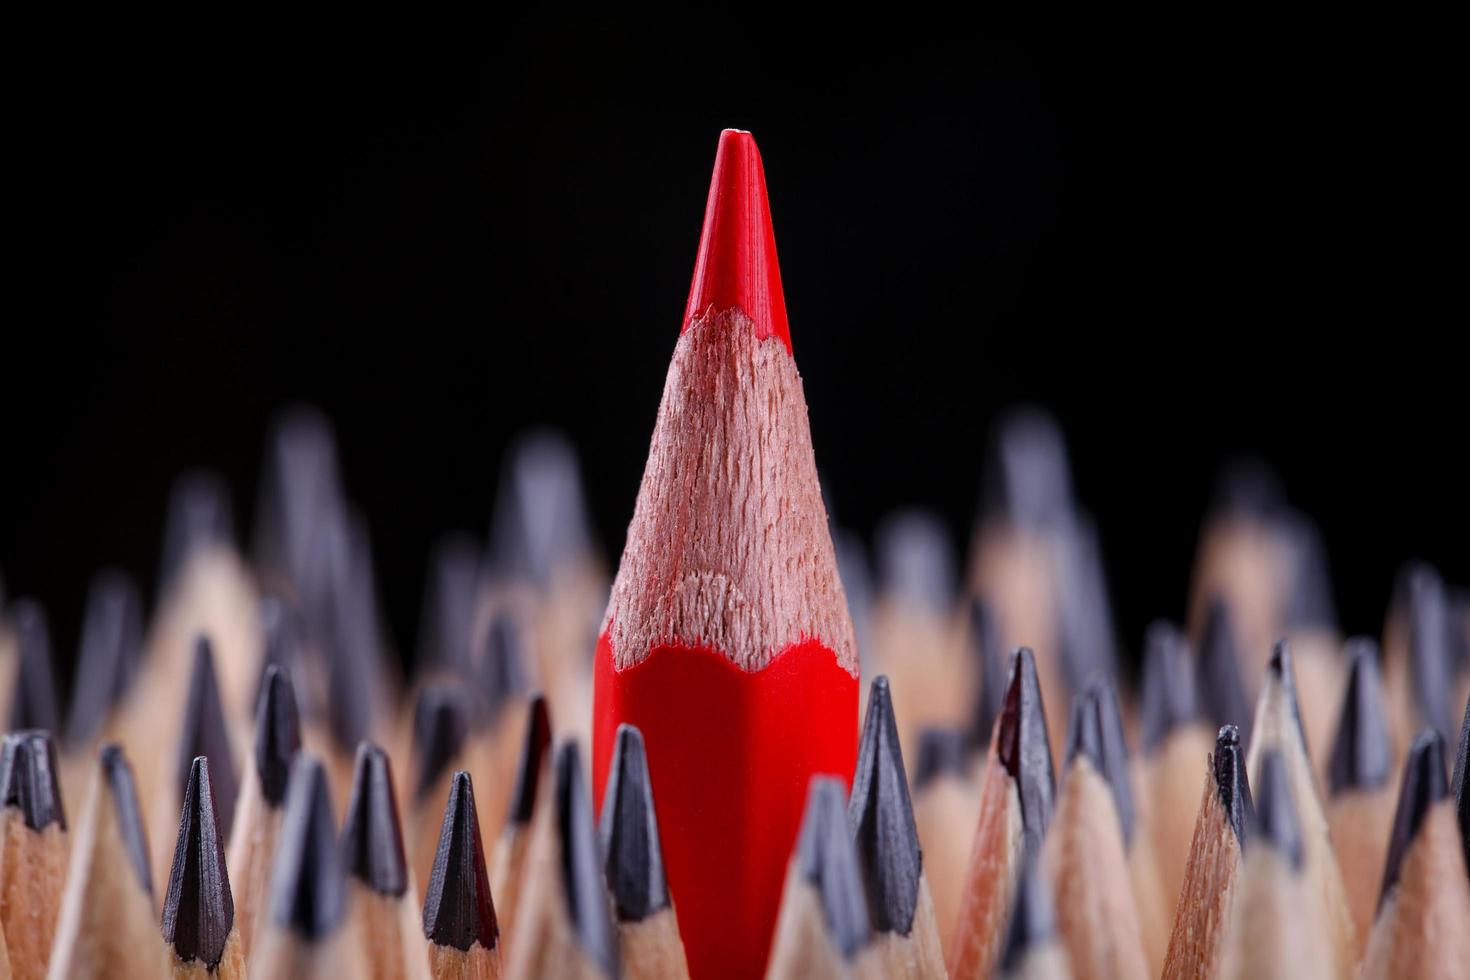 One sharpened red pencil among many ones photo